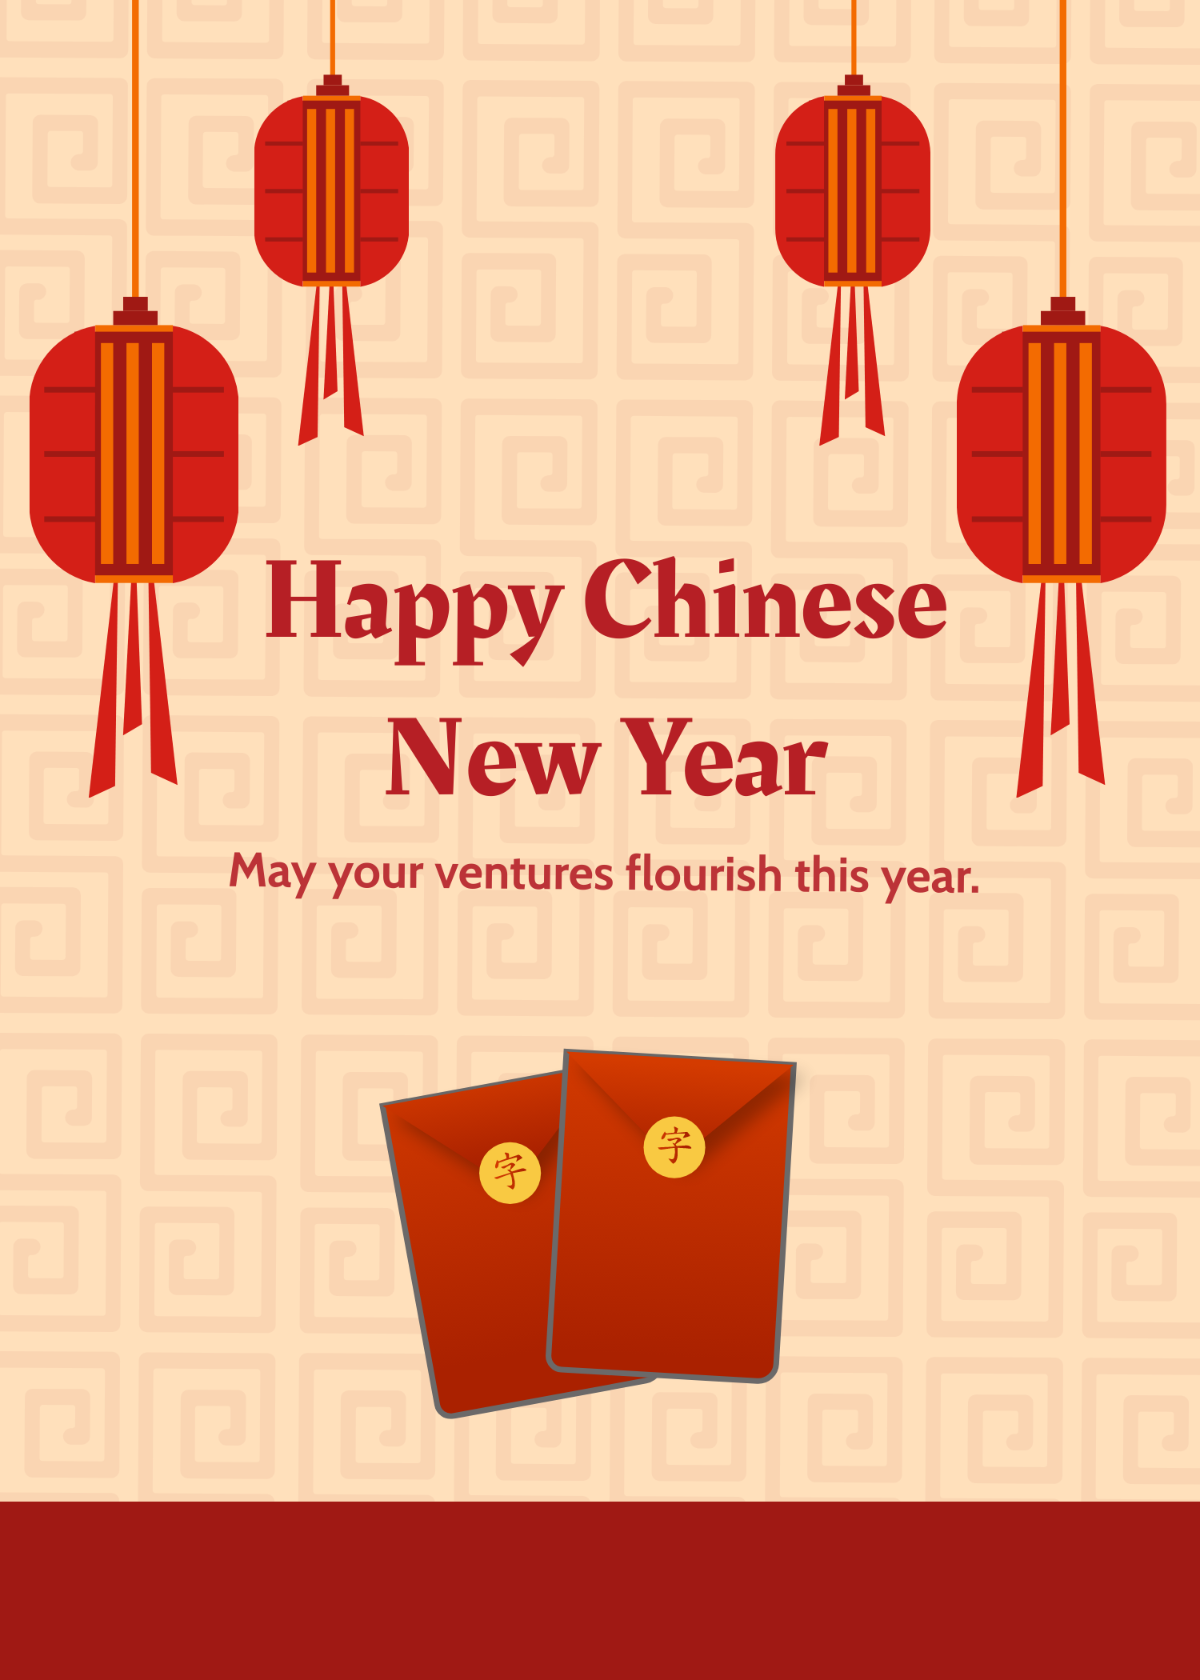 Chinese New Year Wishes Message for Business Template